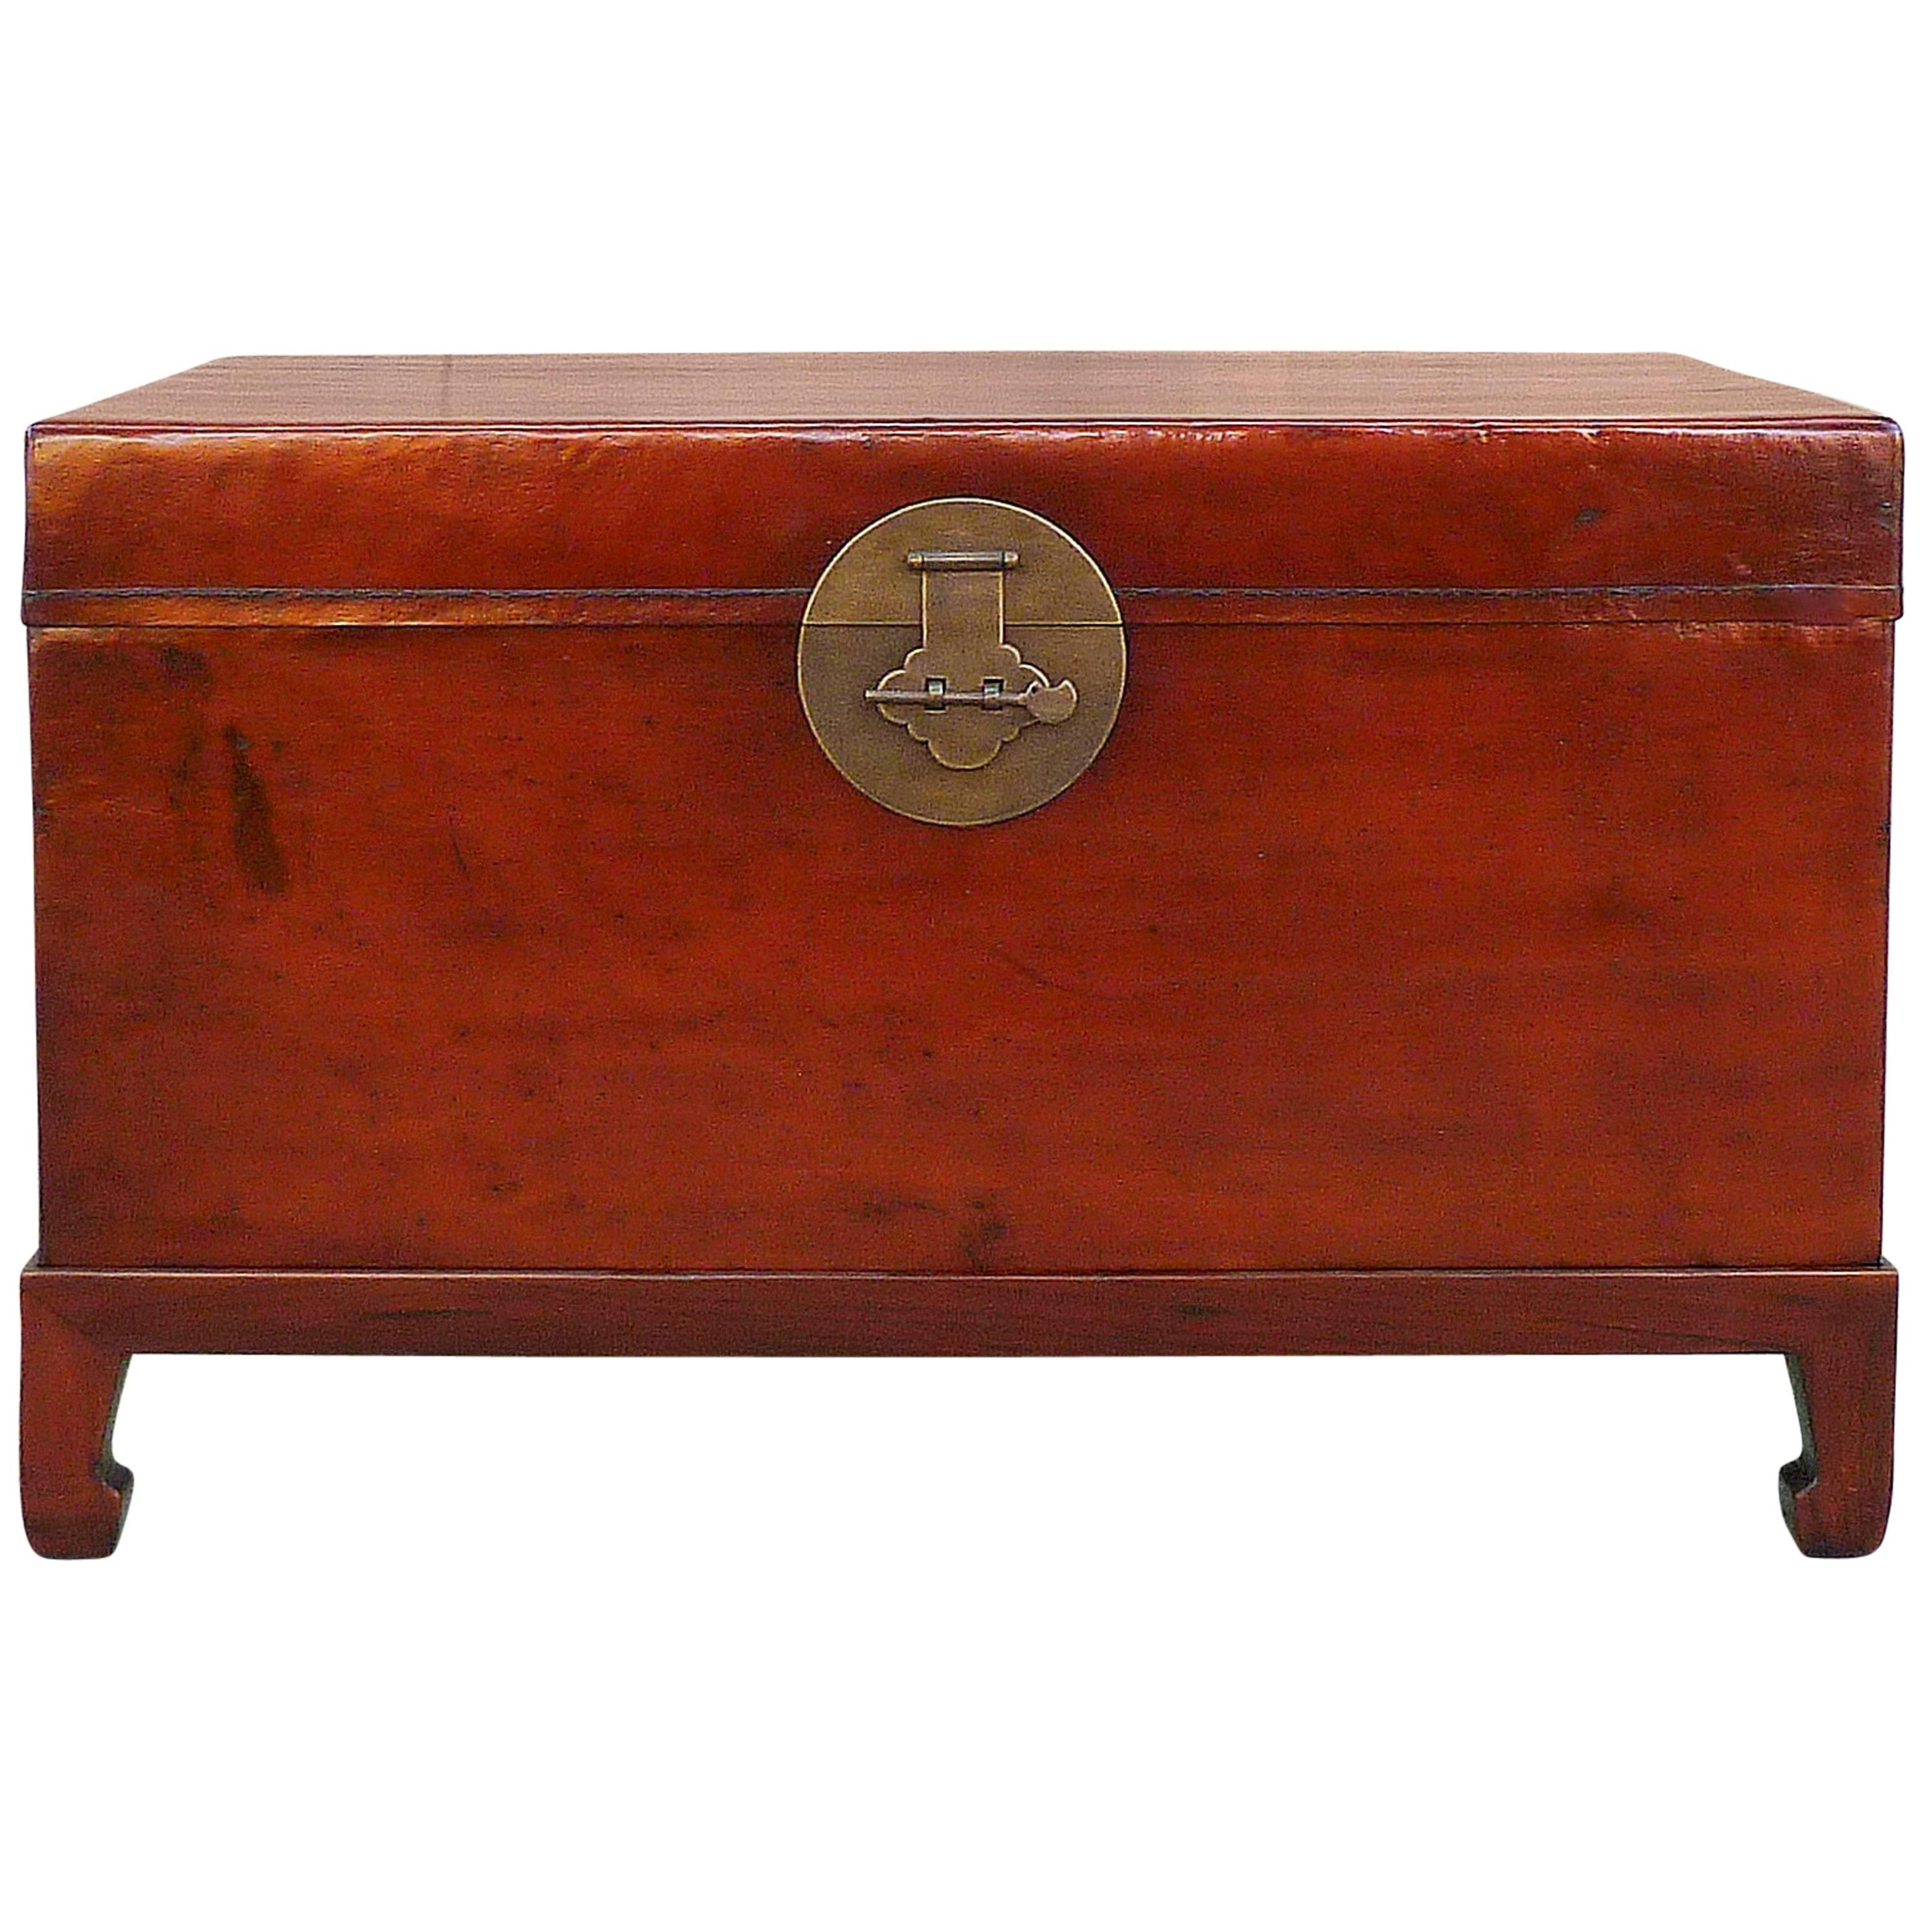 Fine Leather Trunk on Stand